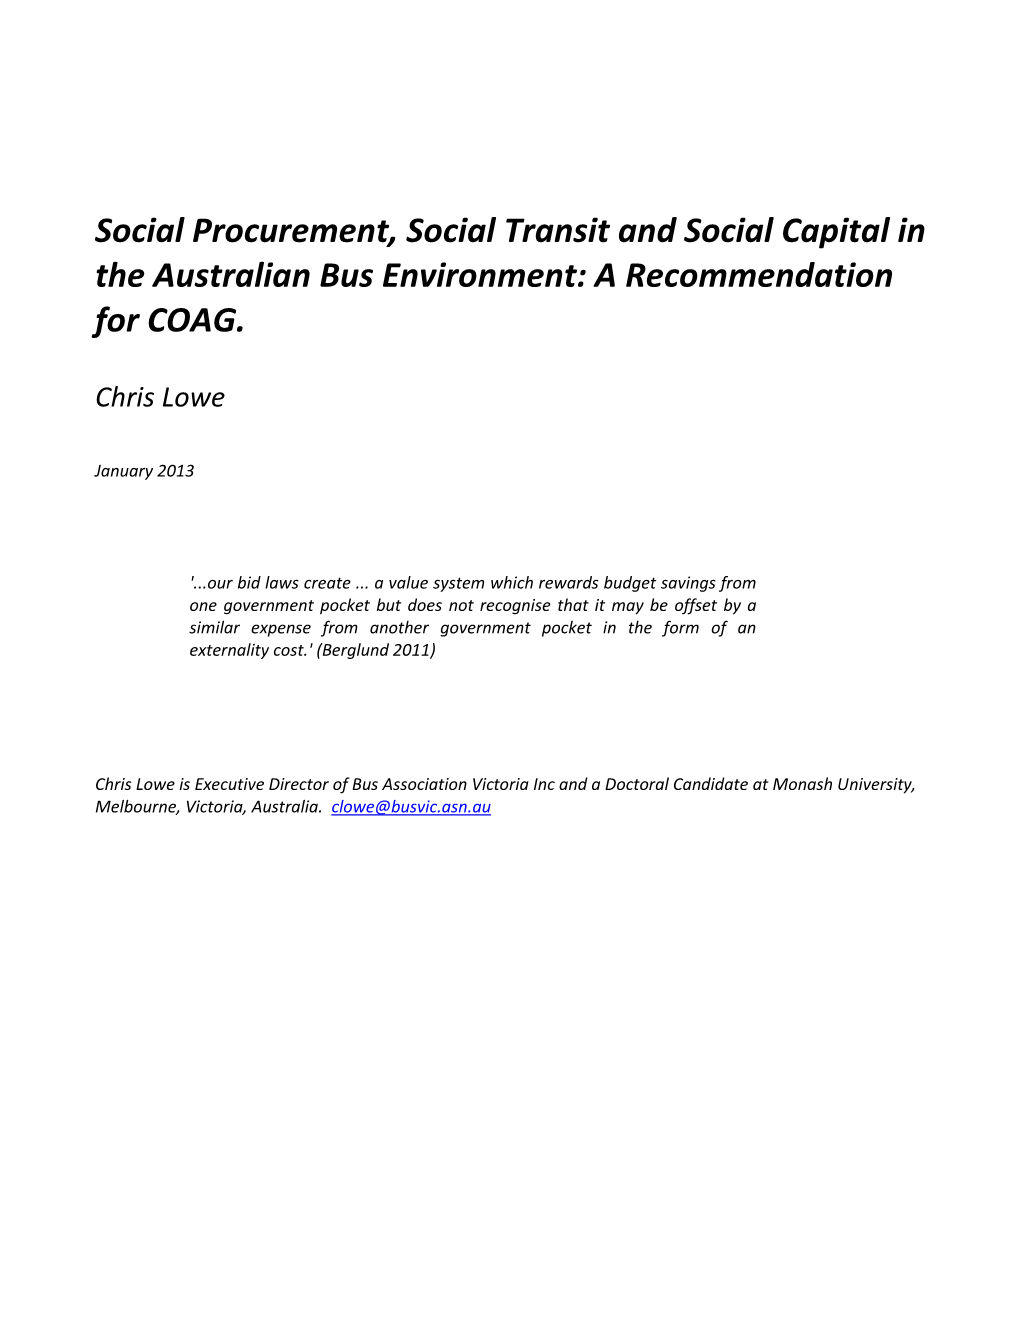 Social Procurement, Social Transit and Social Capital in the Australian Bus Environment: a Recommendation for COAG